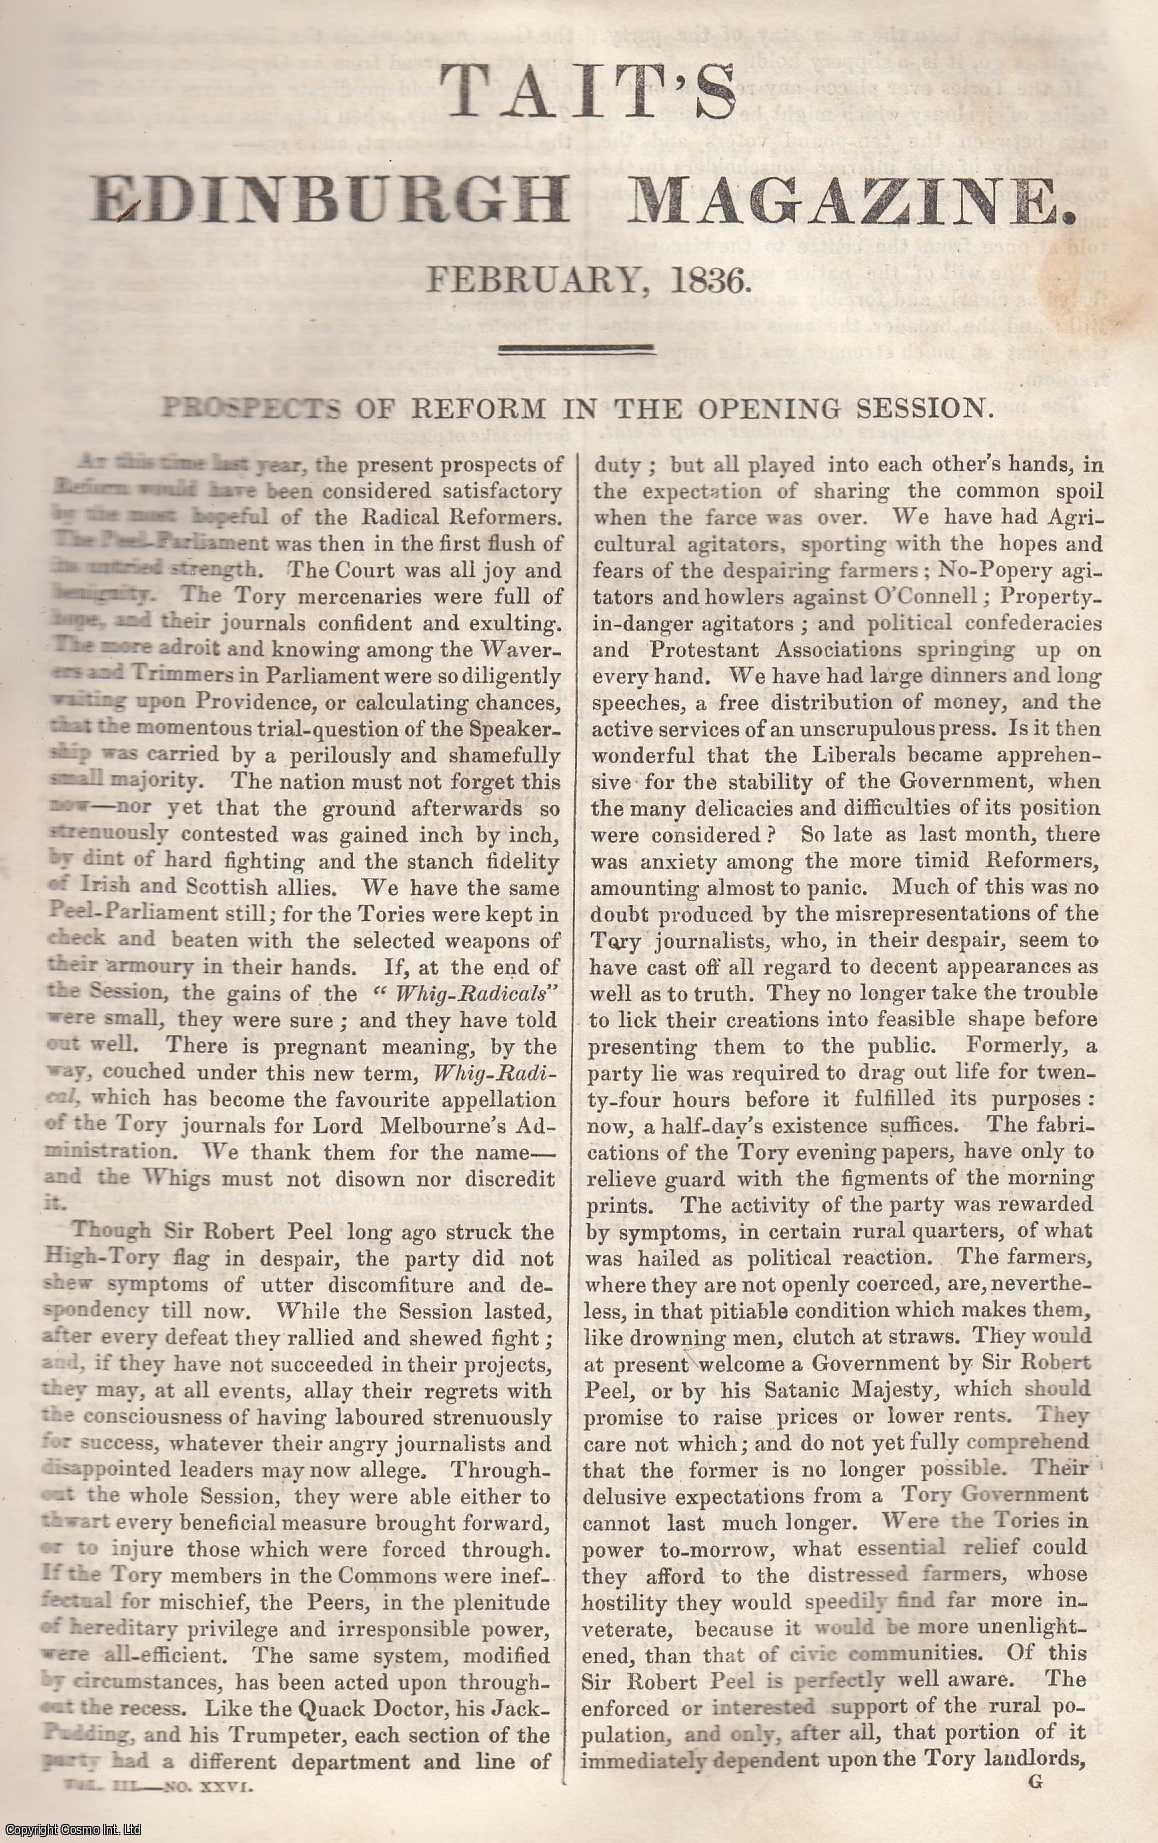 --- - Prospects of Reform in The Opening Session. An original article from Tait's Edinburgh Magazine, 1836.